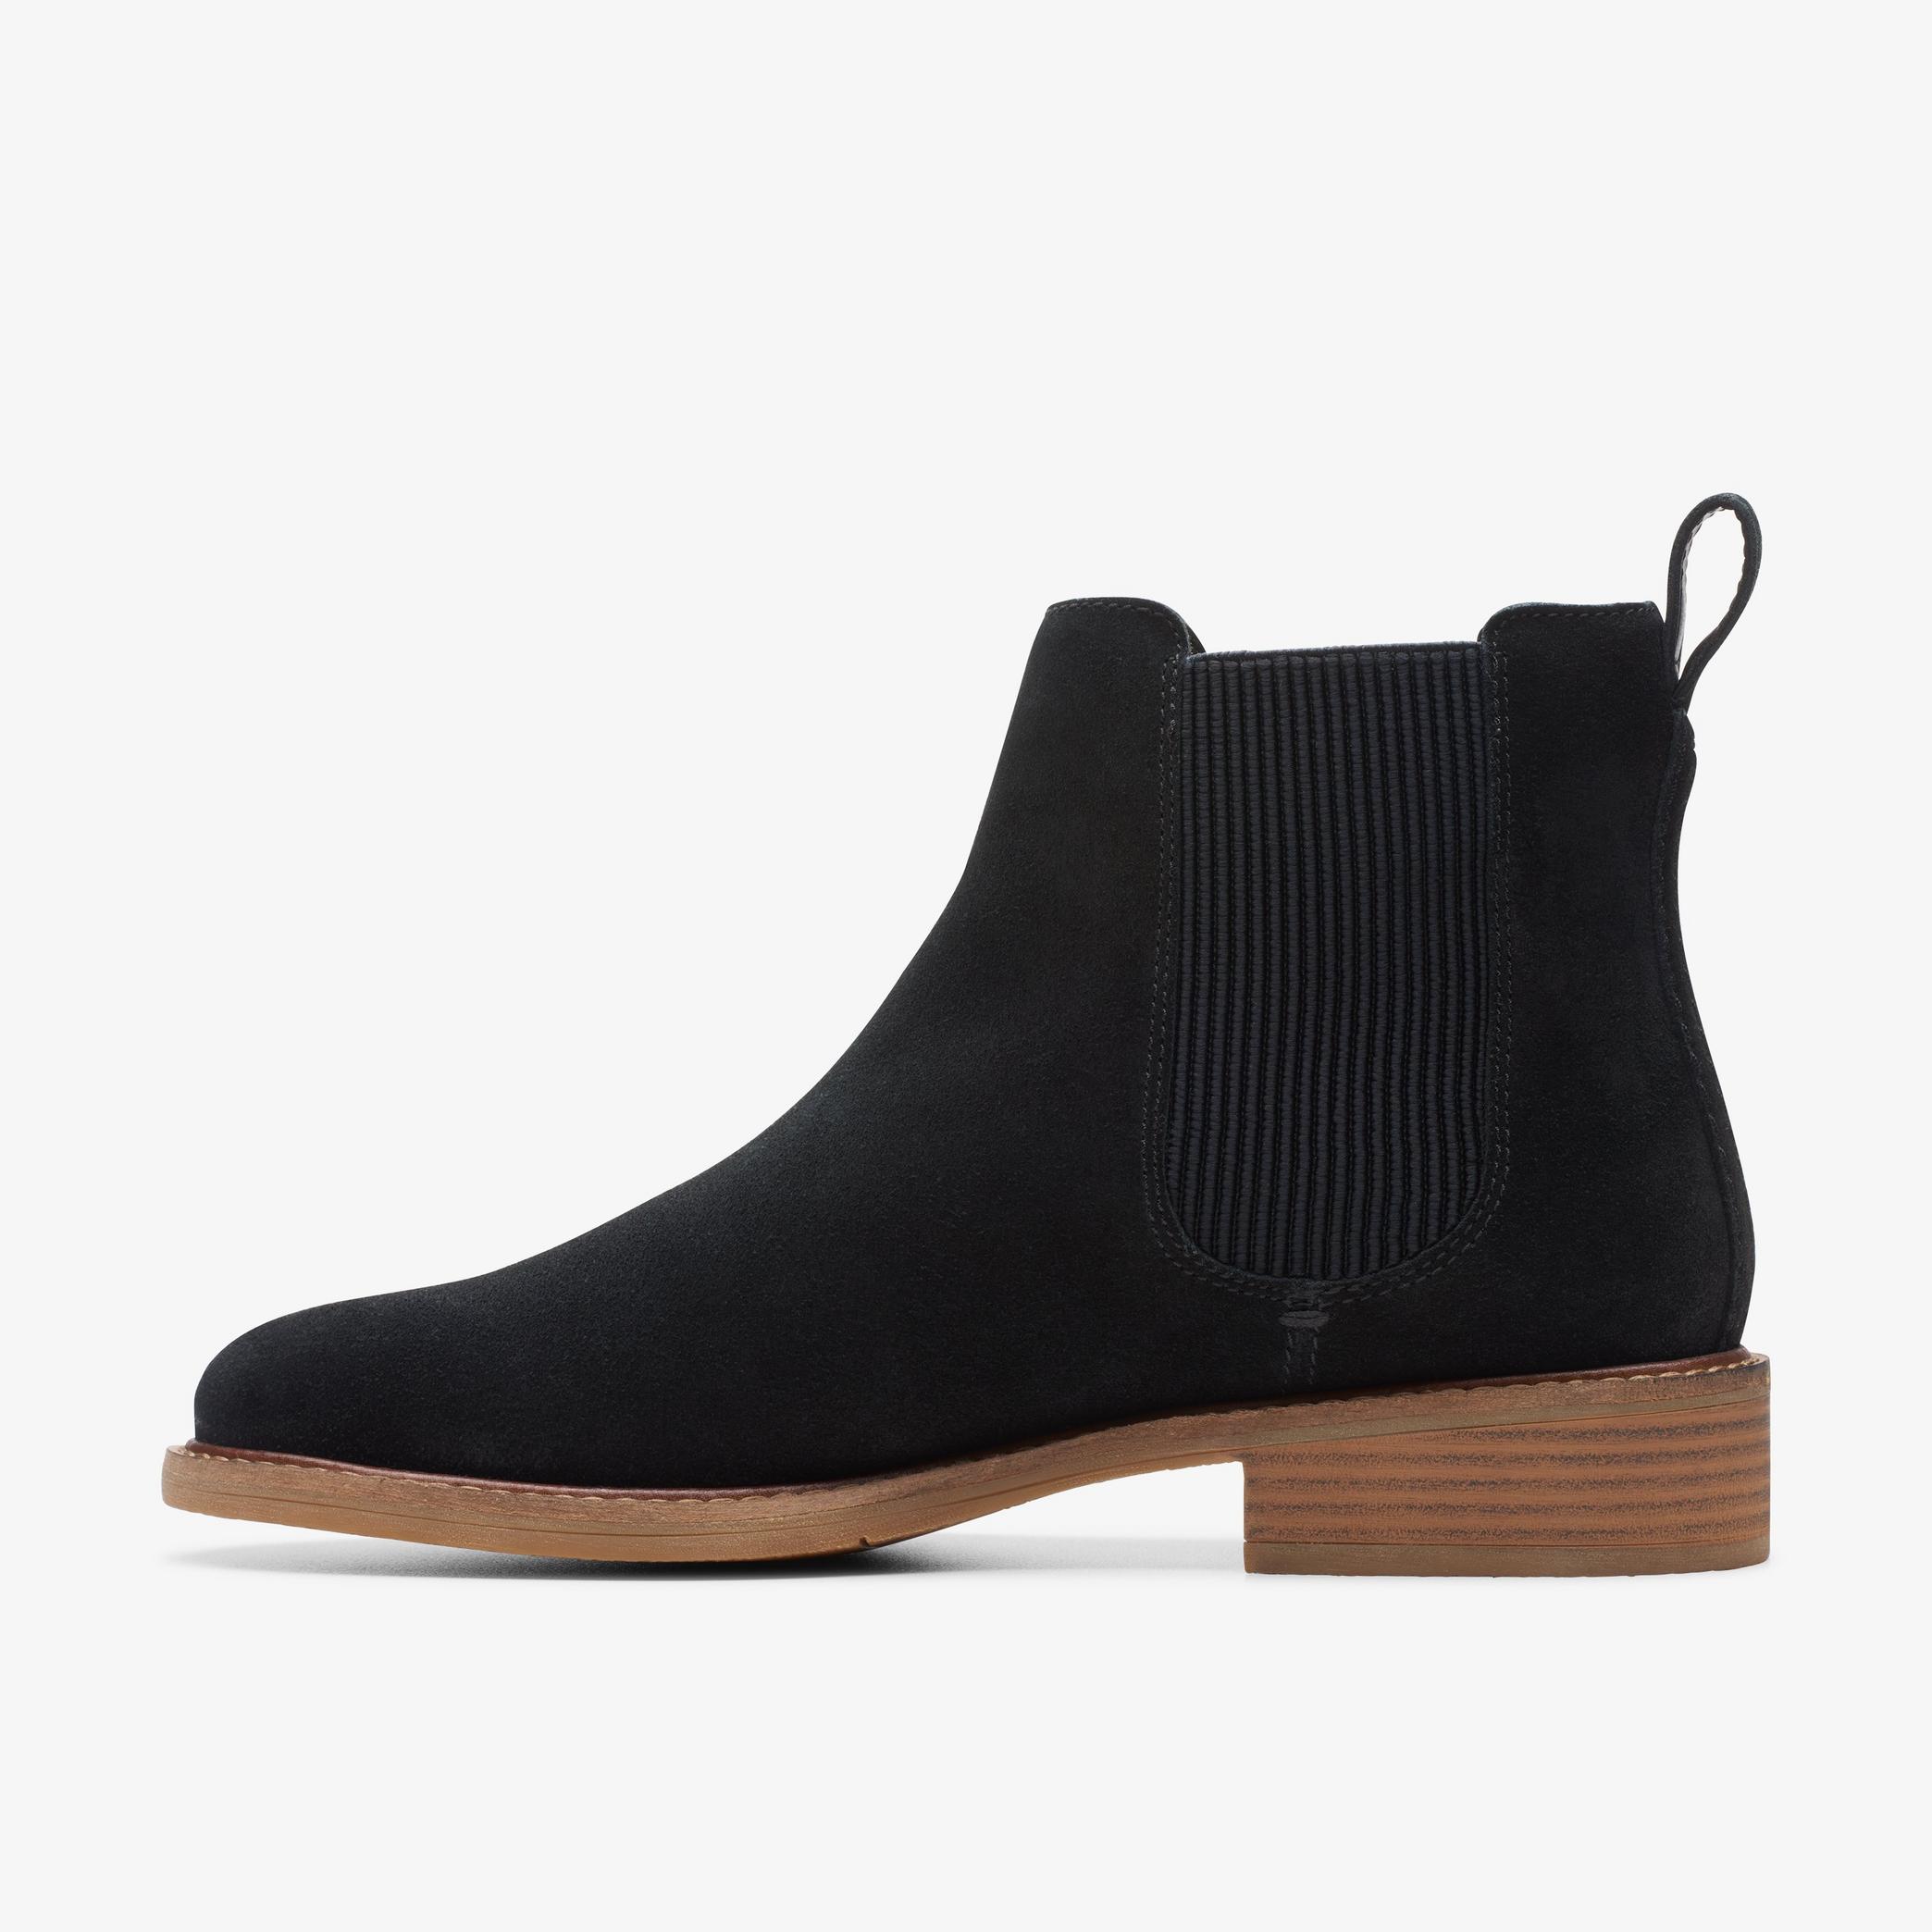 Cologne Arlo 2 Black Suede Chelsea Boots, view 3 of 7